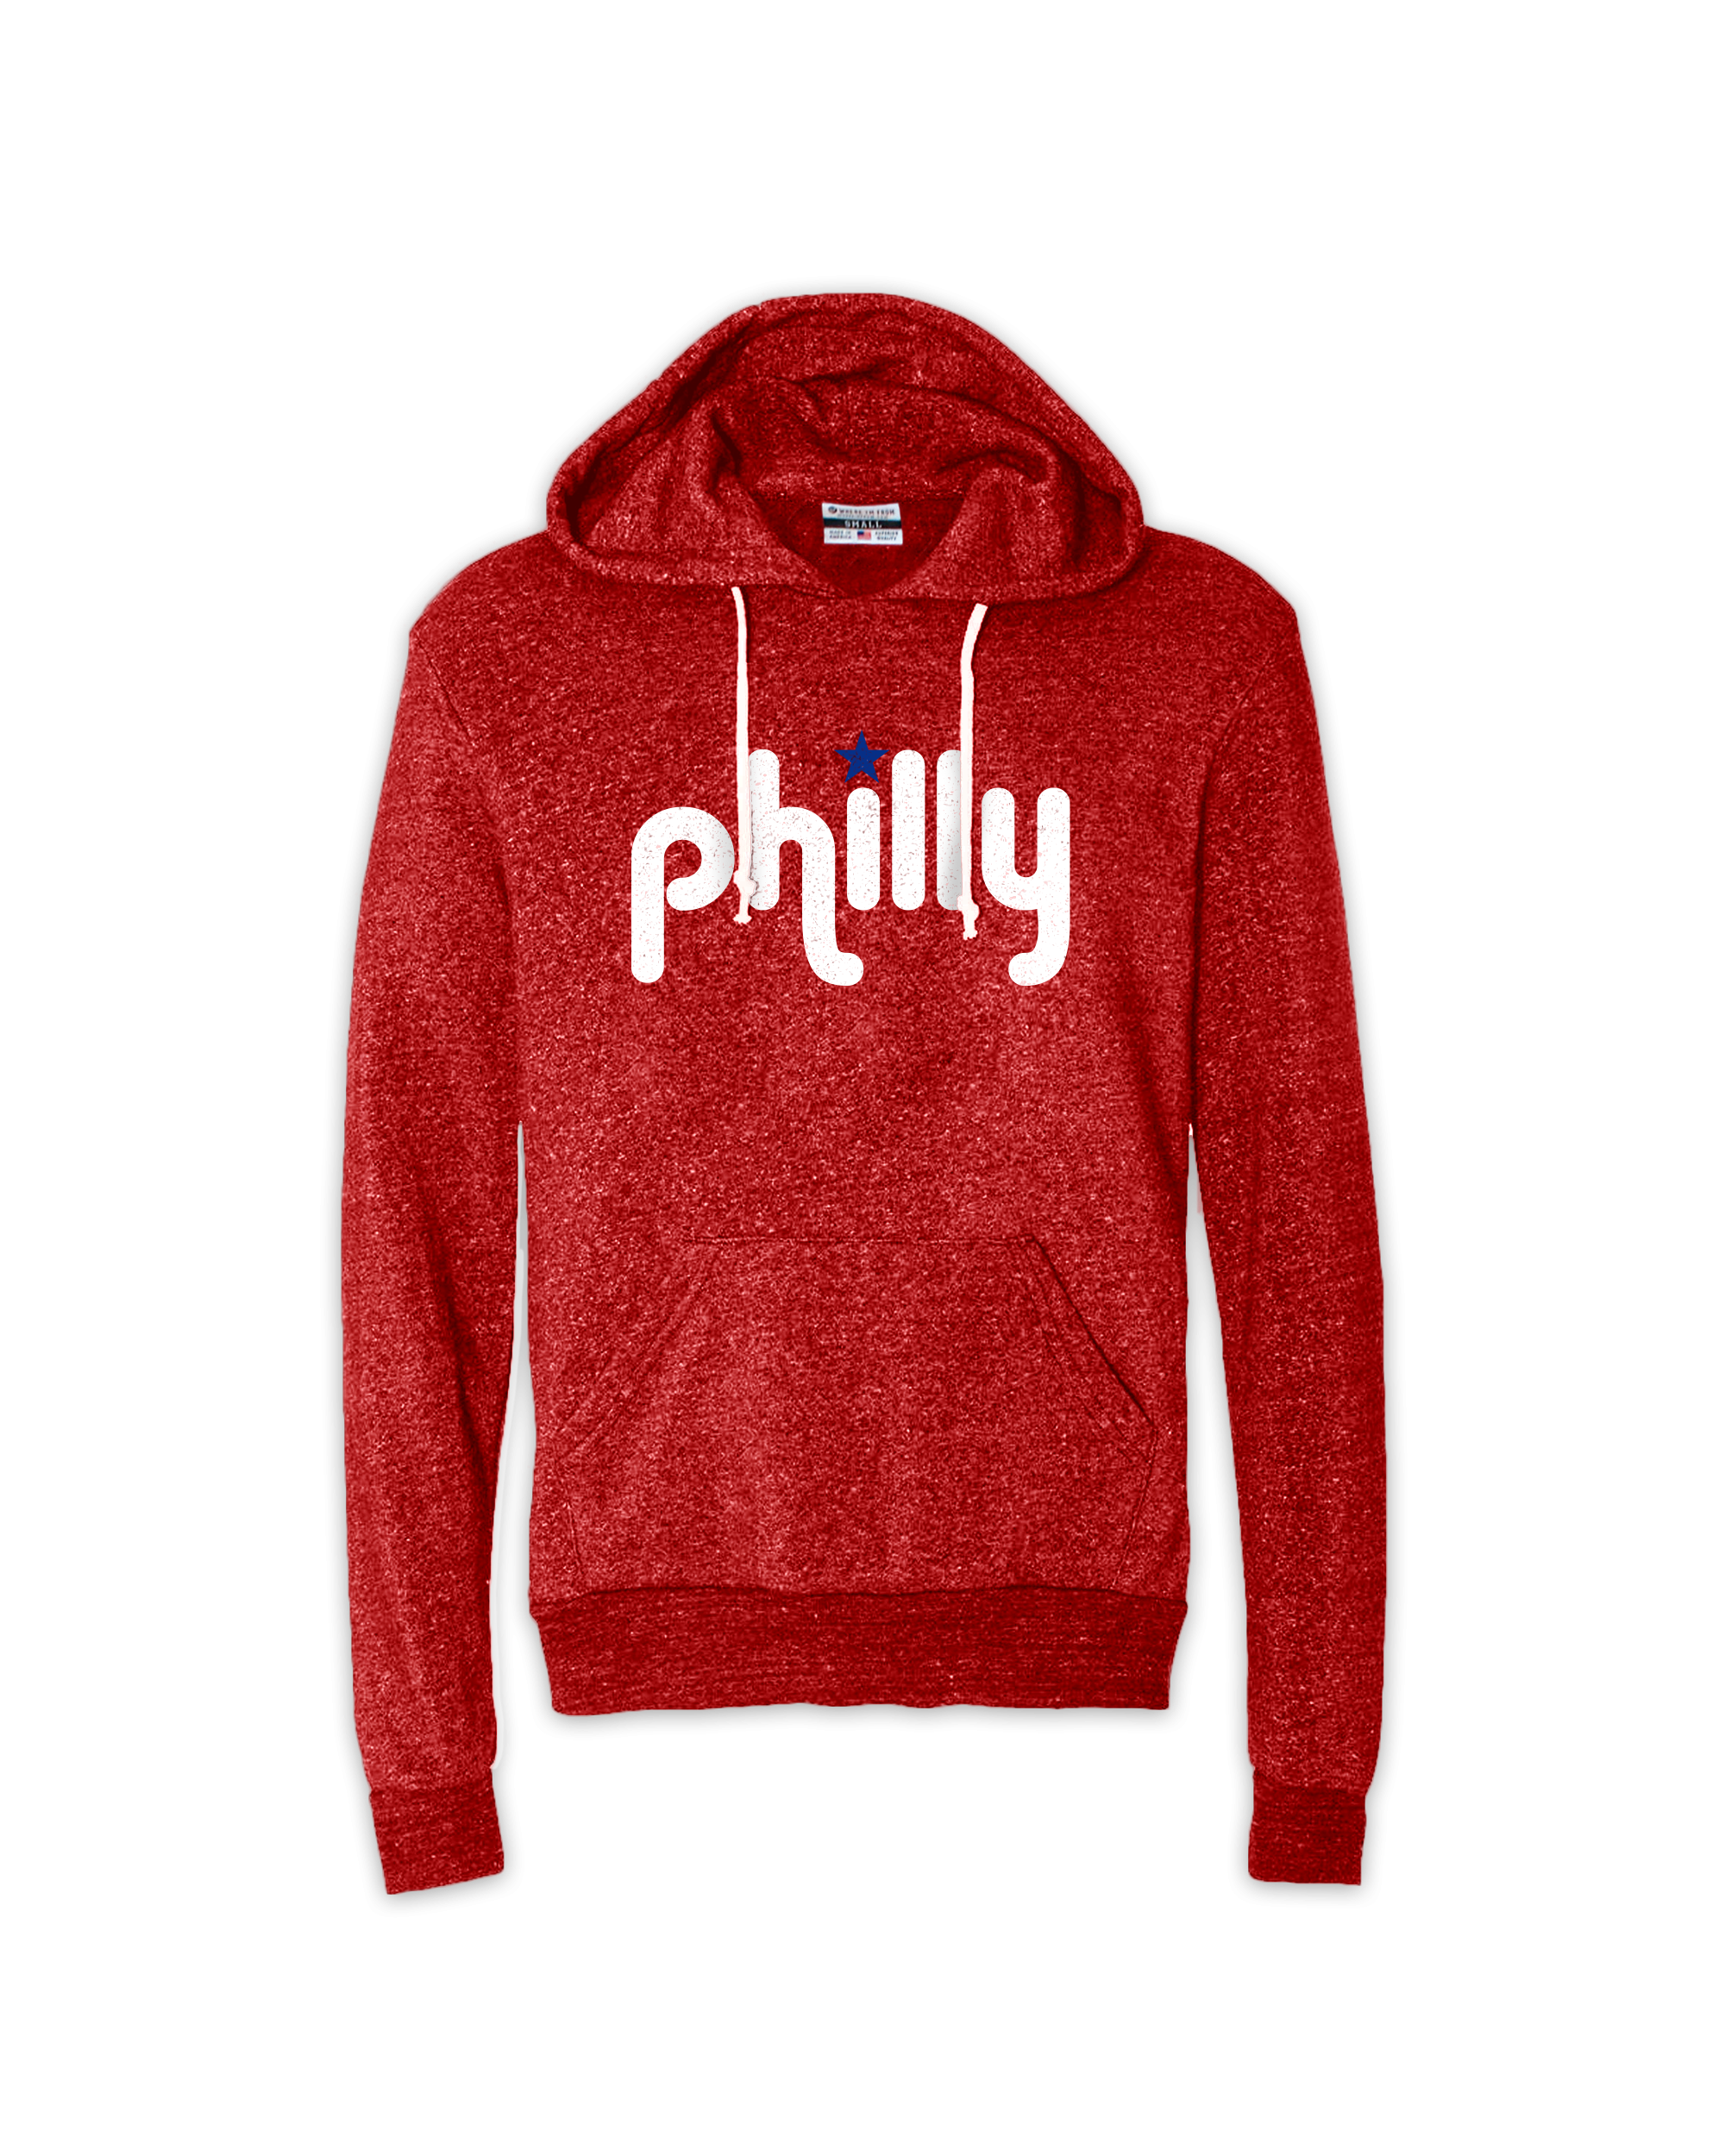 Philly Monoline Star Red Hoodie